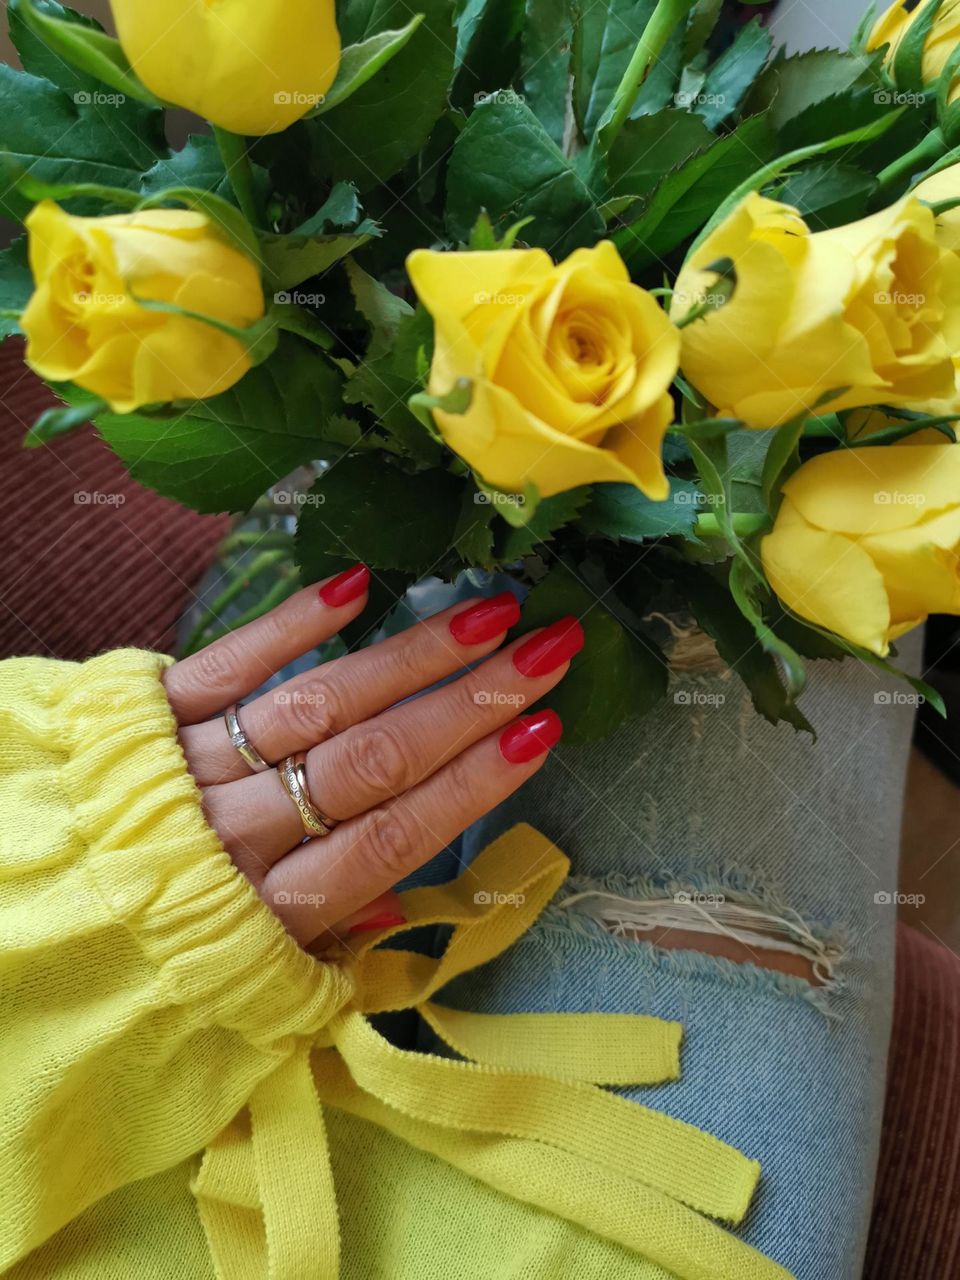 Red nail polish, red manicure. Yellow roses bouquet. Yellow jumper. 